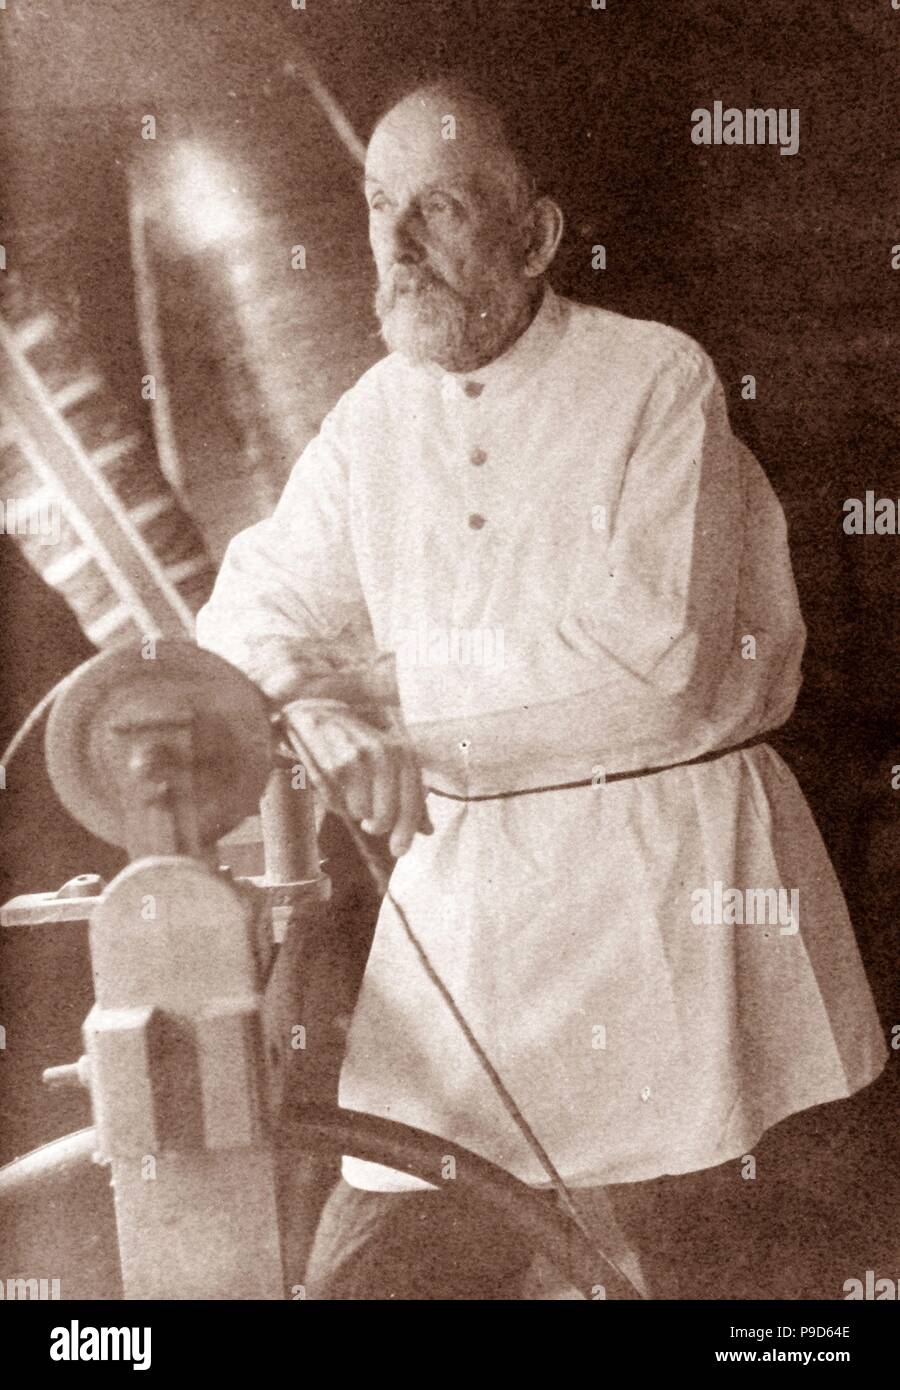 Konstantin Tsiolkovsky (1857-1935), rocket scientist and pioneer of the astronautic theory. Museum: Russian State Film and Photo Archive, Krasnogorsk. Stock Photo